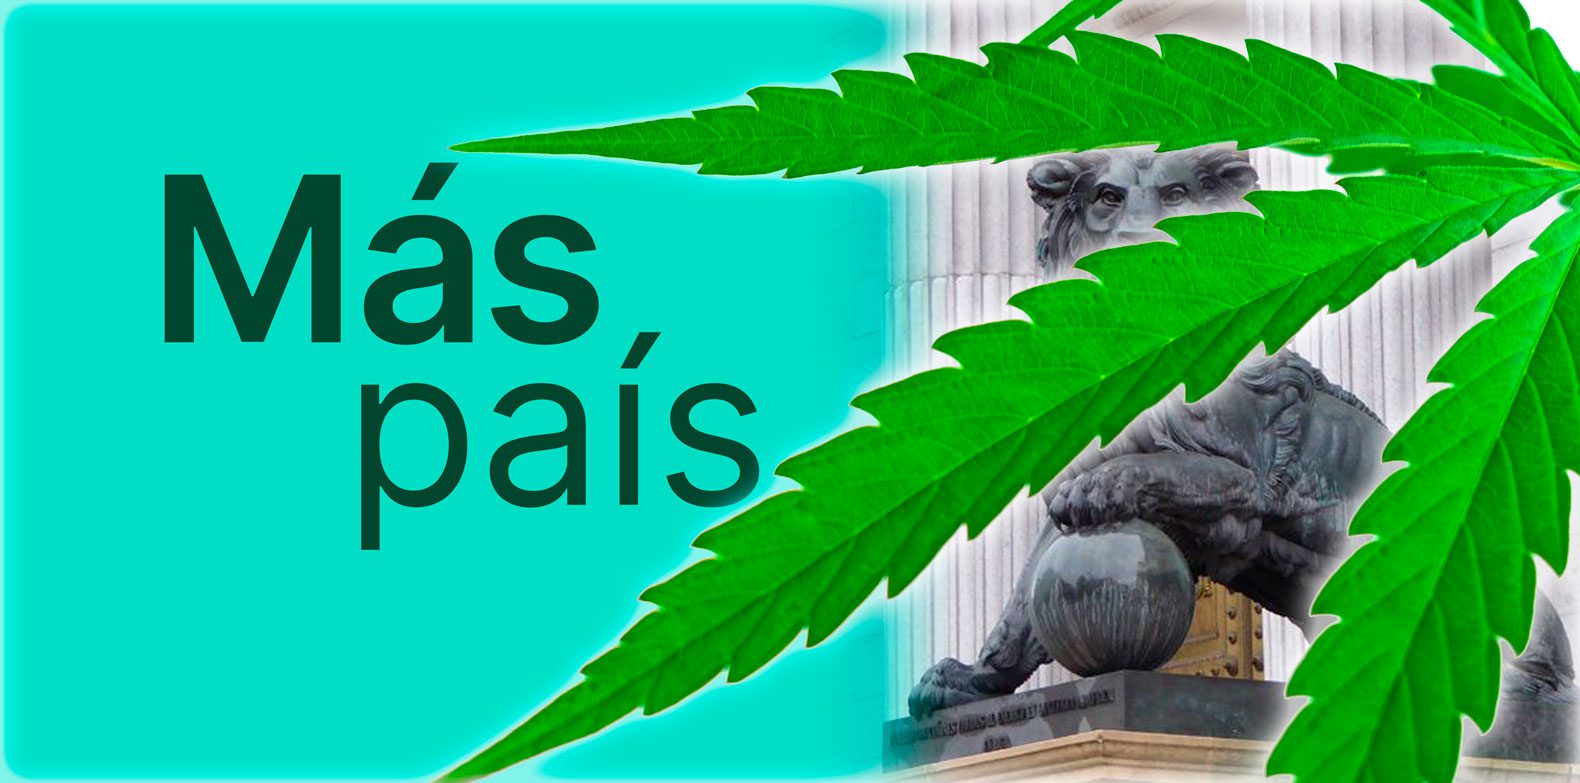 Comprehensive cannabis law in Spain